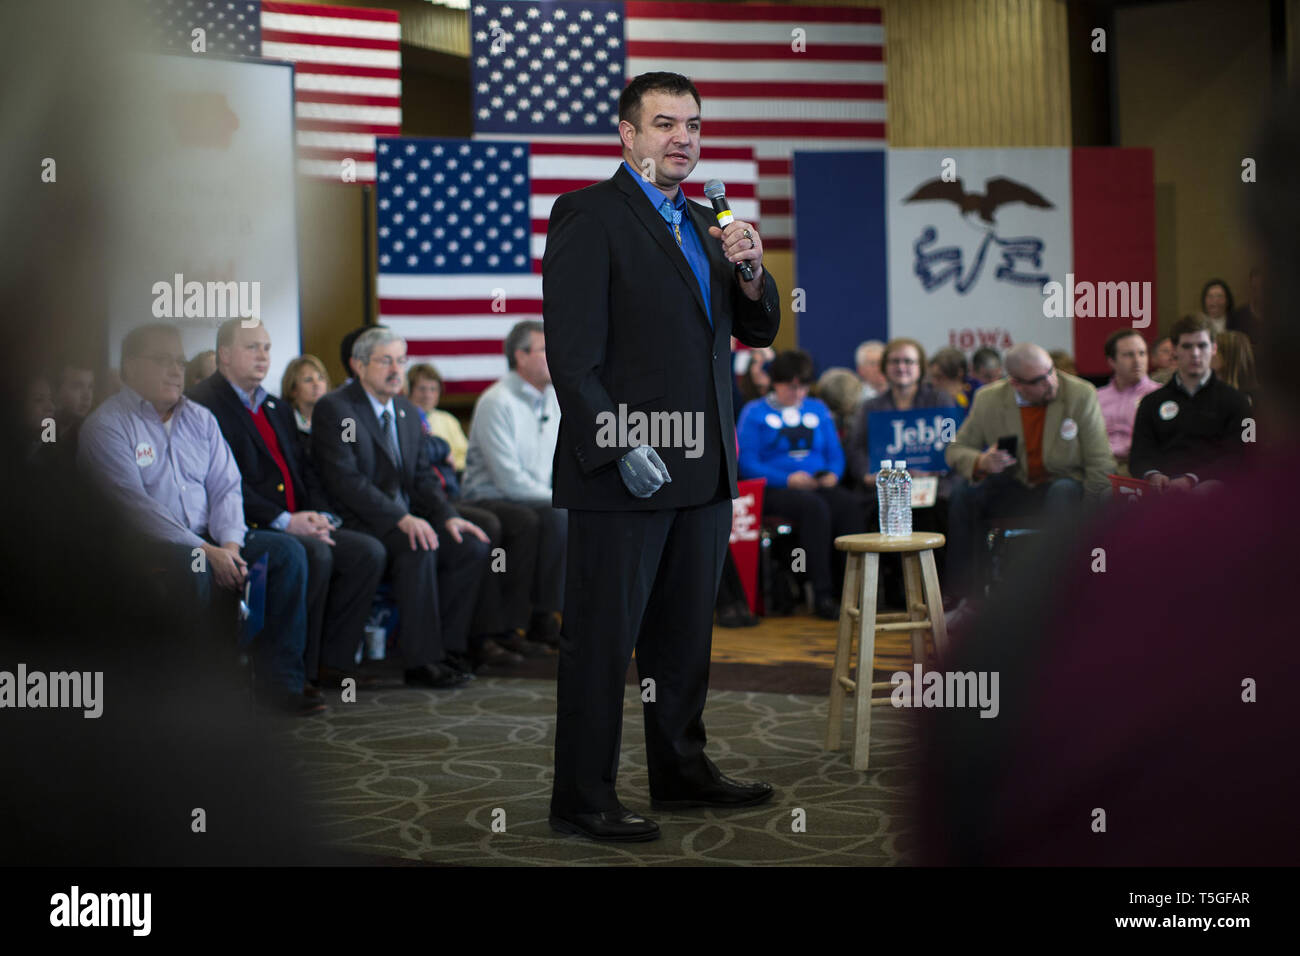 Des Moines, Iowa, USA. 1st Feb, 2016. Leroy Petry, a Medal of Honor recipient, speaks at a townhall meeting for Jeb Bush during the Iowa Caucus in Des Moines, Iowa, February 1, 2016.Bush, son of President George H.W. Bush and brother of President George W. Bush, lost to Sen. Ted Cruz from Texas. Credit: Bill Putnam/ZUMA Wire/Alamy Live News Stock Photo